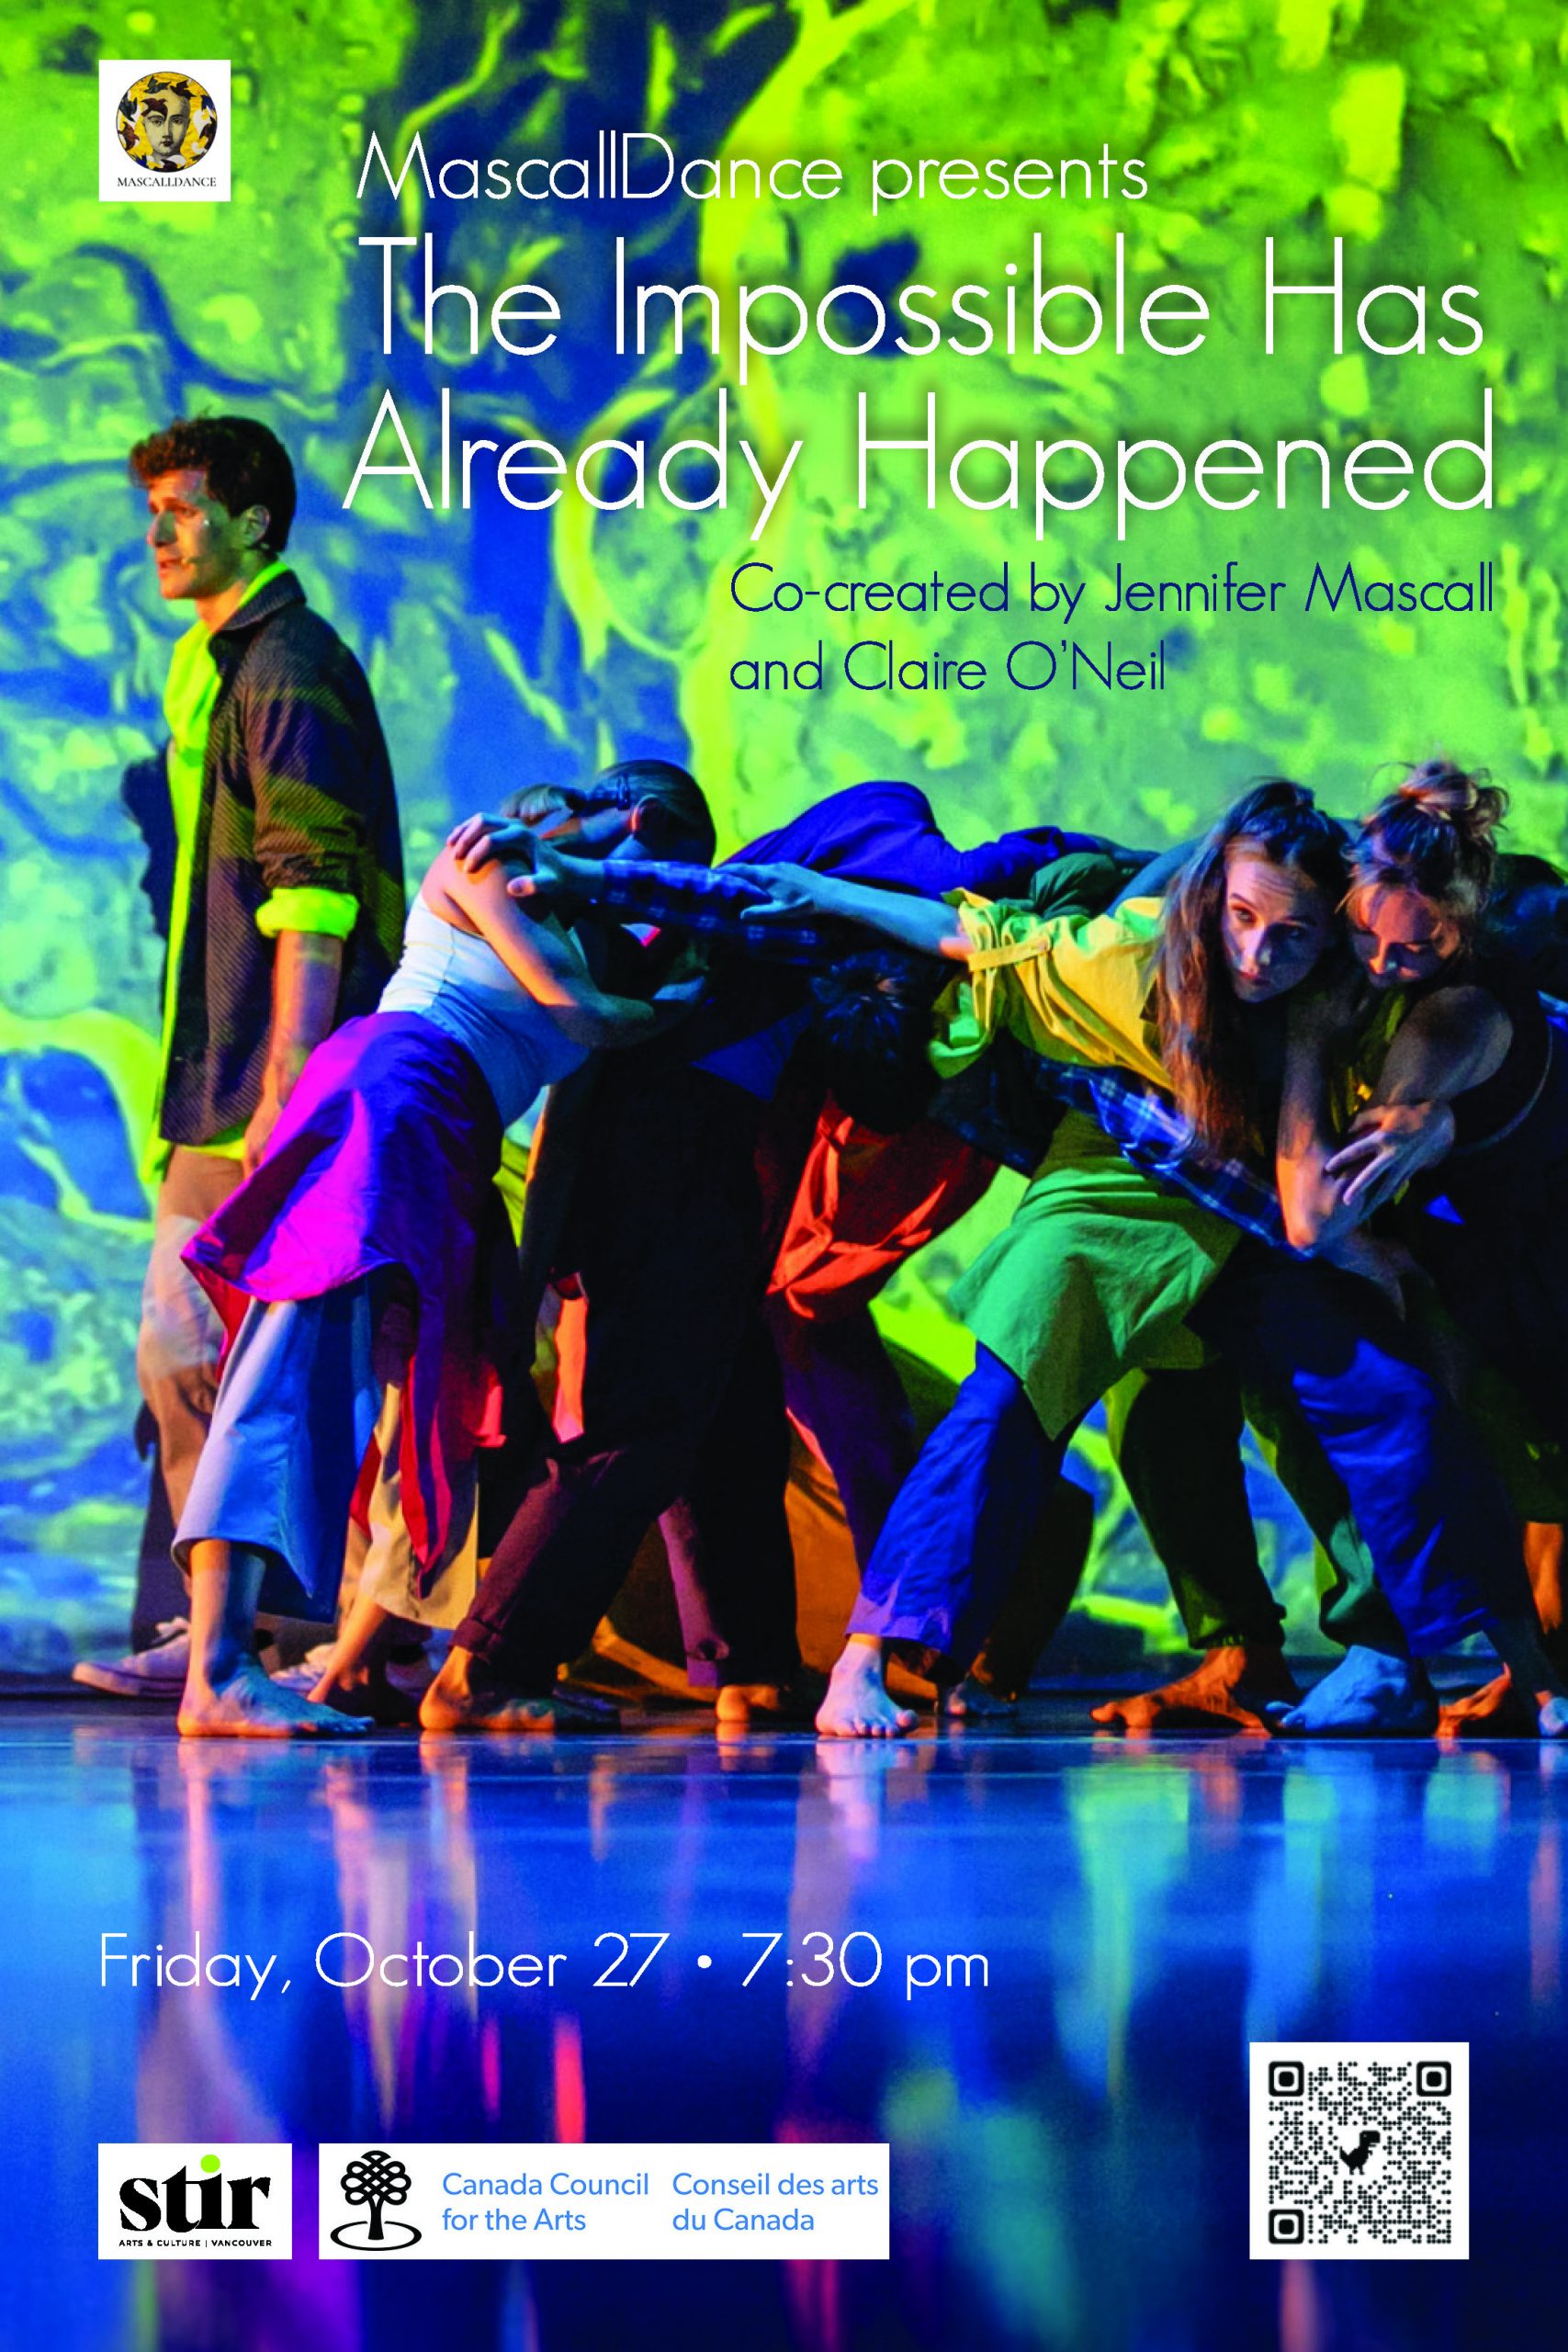 Poster for MascallDance's The Impossible Has Already Happened